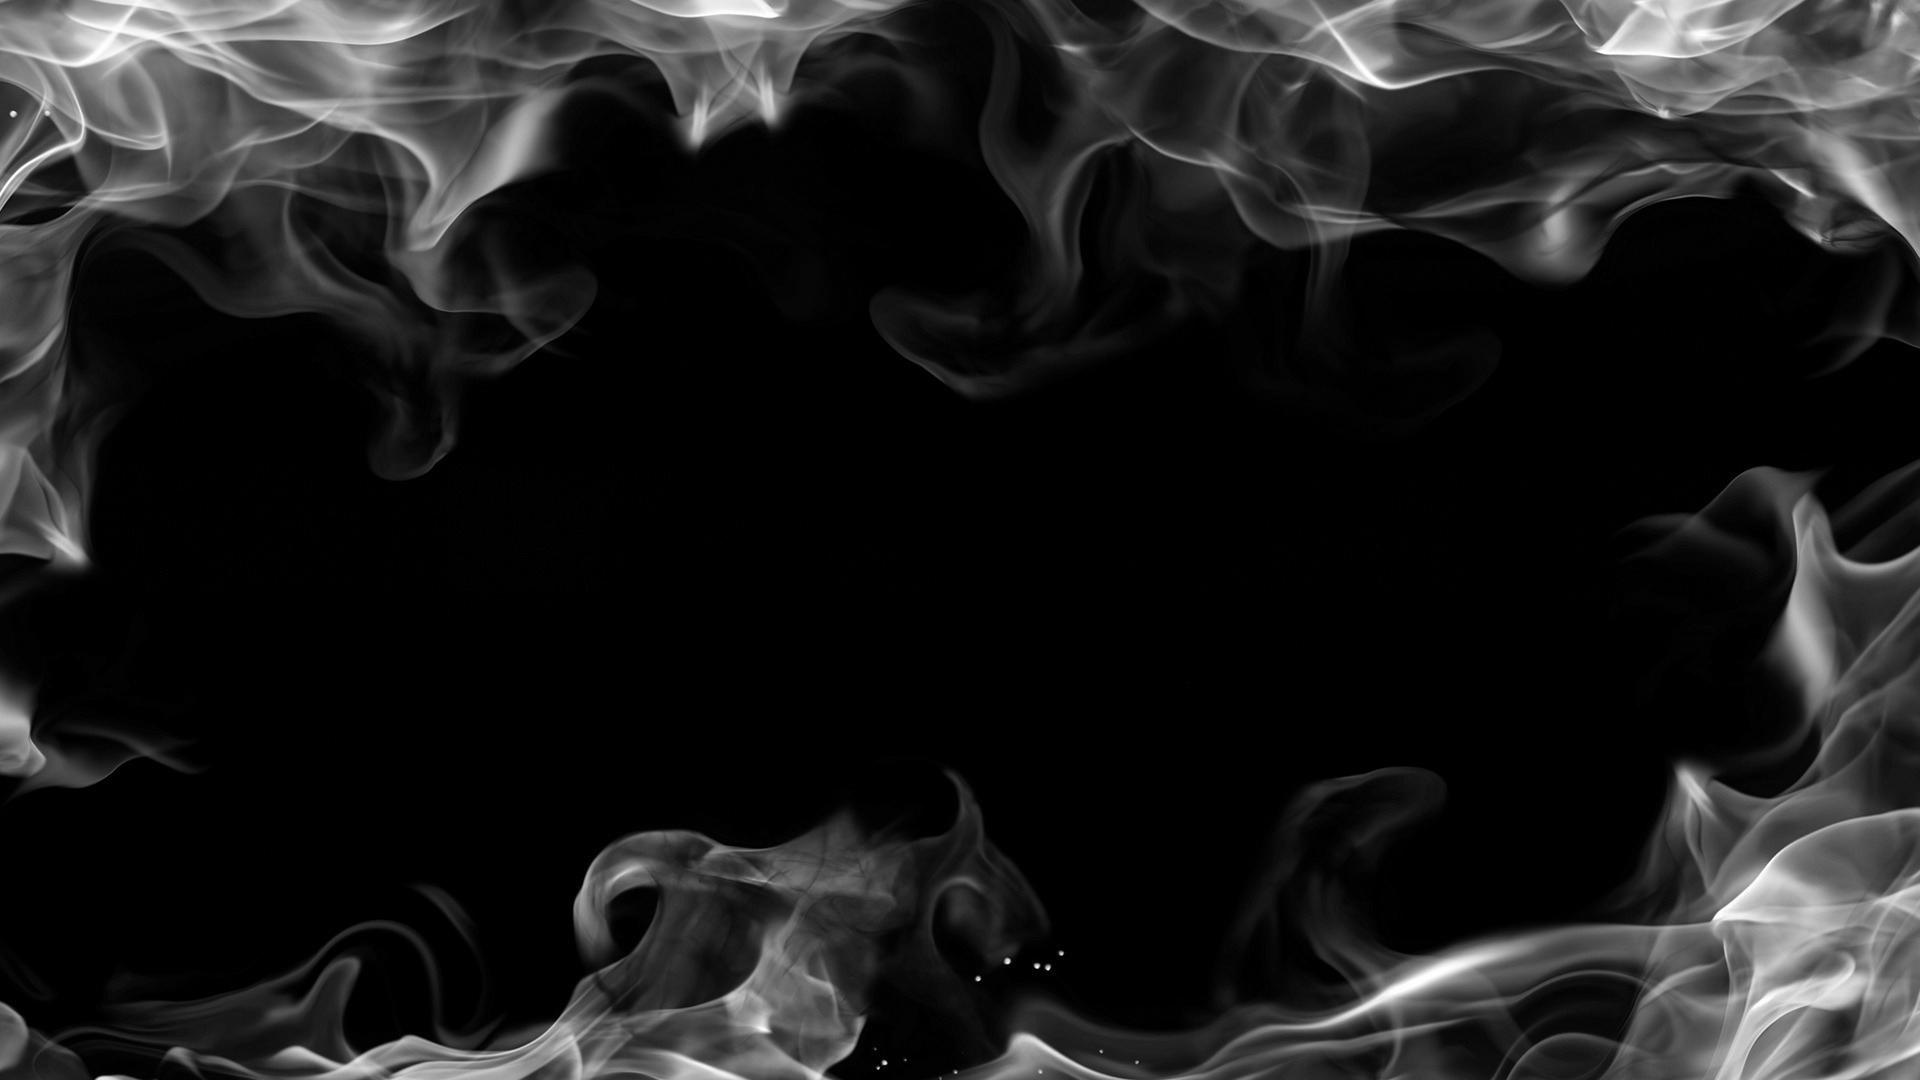 Free download Black Smoke Wallpaper Full HD with High Definition [1920x1080] for your Desktop, Mobile & Tablet. Explore Black Smoke Wallpaper. Blue Smoke Wallpaper, Colored Smoke Wallpaper, Red Smoke Wallpaper